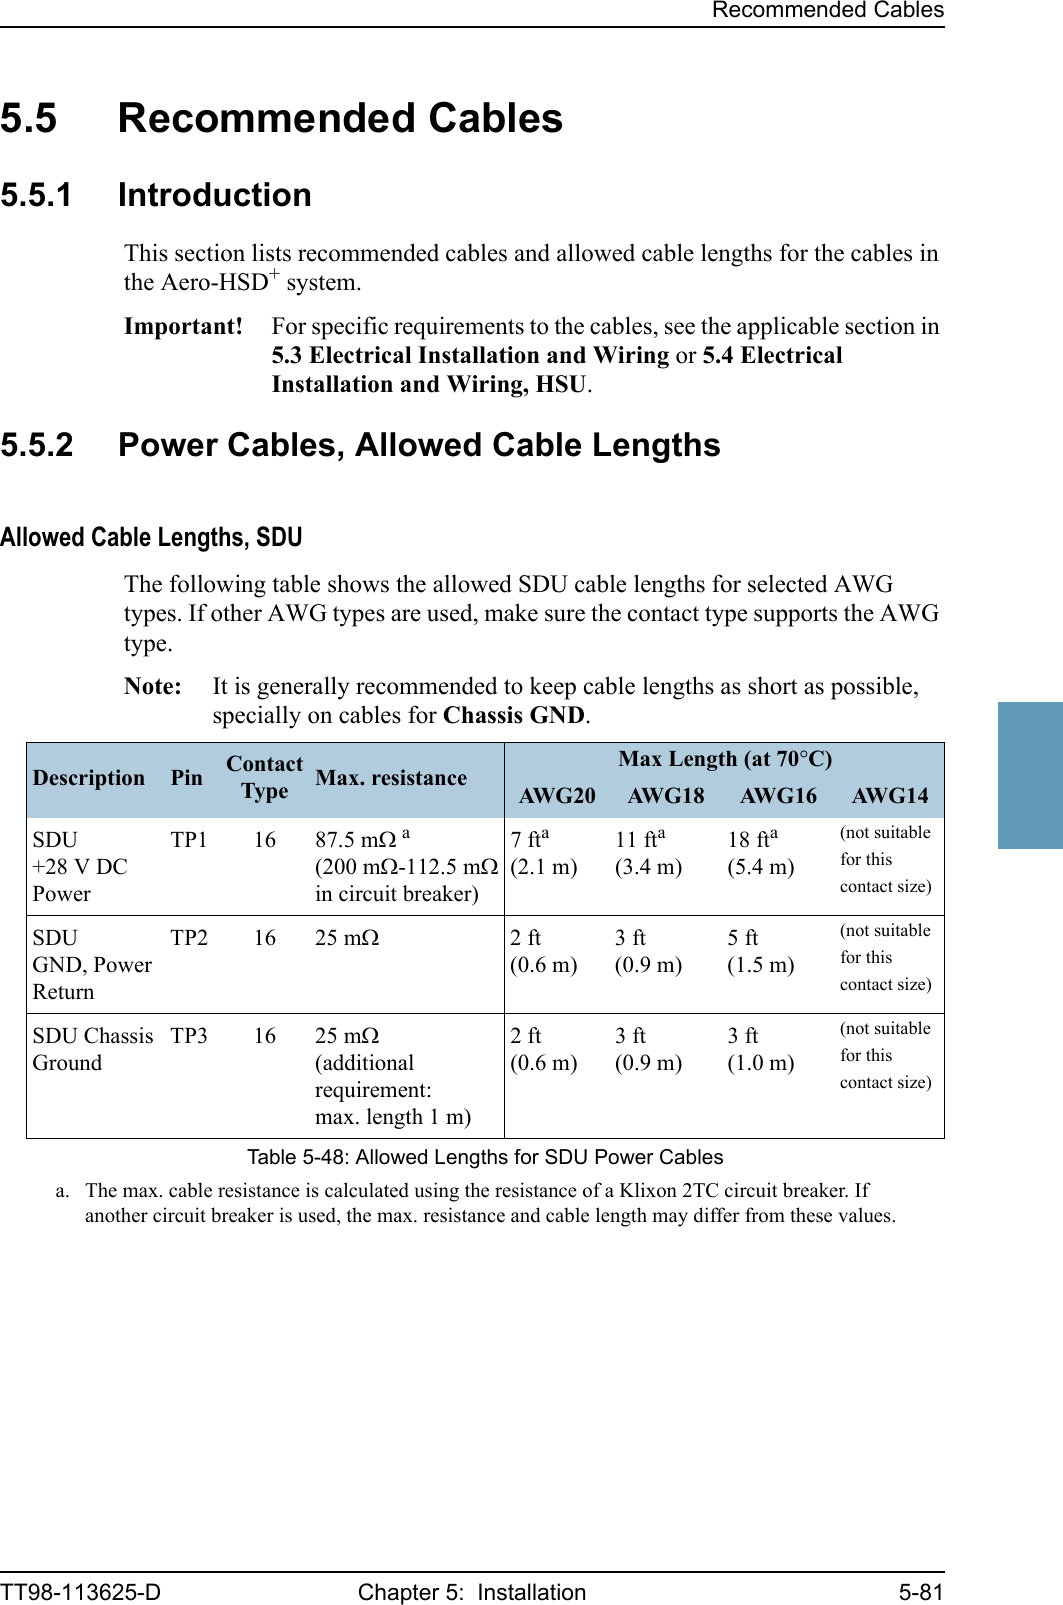 Recommended CablesTT98-113625-D Chapter 5:  Installation 5-8155555.5 Recommended Cables5.5.1 IntroductionThis section lists recommended cables and allowed cable lengths for the cables in the Aero-HSD+ system.Important! For specific requirements to the cables, see the applicable section in 5.3 Electrical Installation and Wiring or 5.4 Electrical Installation and Wiring, HSU.5.5.2 Power Cables, Allowed Cable LengthsAllowed Cable Lengths, SDUThe following table shows the allowed SDU cable lengths for selected AWG types. If other AWG types are used, make sure the contact type supports the AWG type.Note: It is generally recommended to keep cable lengths as short as possible, specially on cables for Chassis GND.Description Pin Contact Type Max. resistance Max Length (at 70°C)AW G 2 0 AW G 1 8 AW G 1 6 AW G 1 4SDU +28 V DC PowerTP1 16 87.5 mΩ a(200 mΩ-112.5 mΩ in circuit breaker)a. The max. cable resistance is calculated using the resistance of a Klixon 2TC circuit breaker. If another circuit breaker is used, the max. resistance and cable length may differ from these values.7fta(2.1 m)11 fta(3.4 m)18 fta(5.4 m)(not suitable for this contact size)SDUGND, Power ReturnTP2 16 25 mΩ2ft(0.6 m)3ft(0.9 m)5 ft(1.5 m)(not suitable for this contact size)SDU Chassis GroundTP3 16 25 mΩ(additional requirement: max. length 1 m)2ft(0.6 m)3ft(0.9 m)3 ft(1.0 m)(not suitable for this contact size)Table 5-48: Allowed Lengths for SDU Power Cables